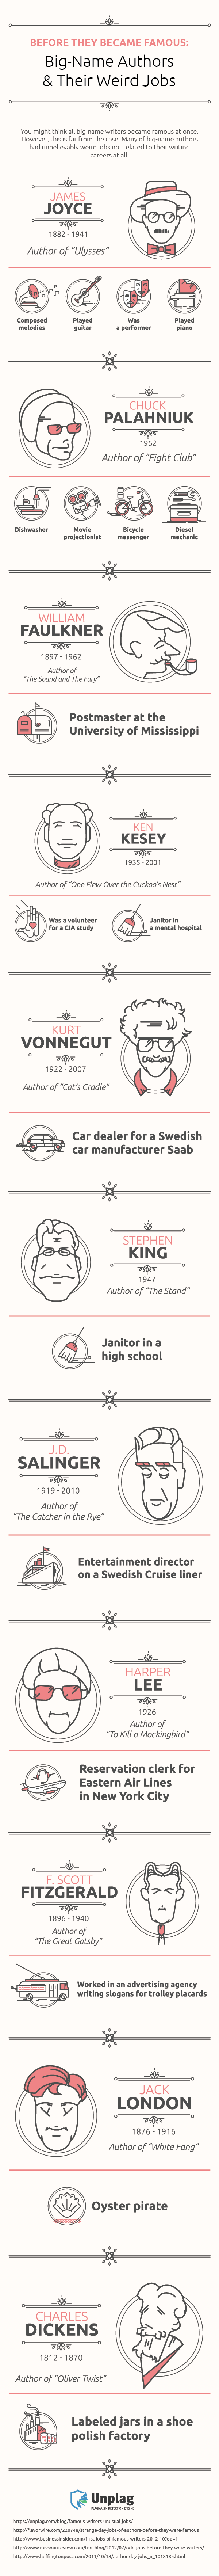 Unusual Jobs of Famous Writers Infographic